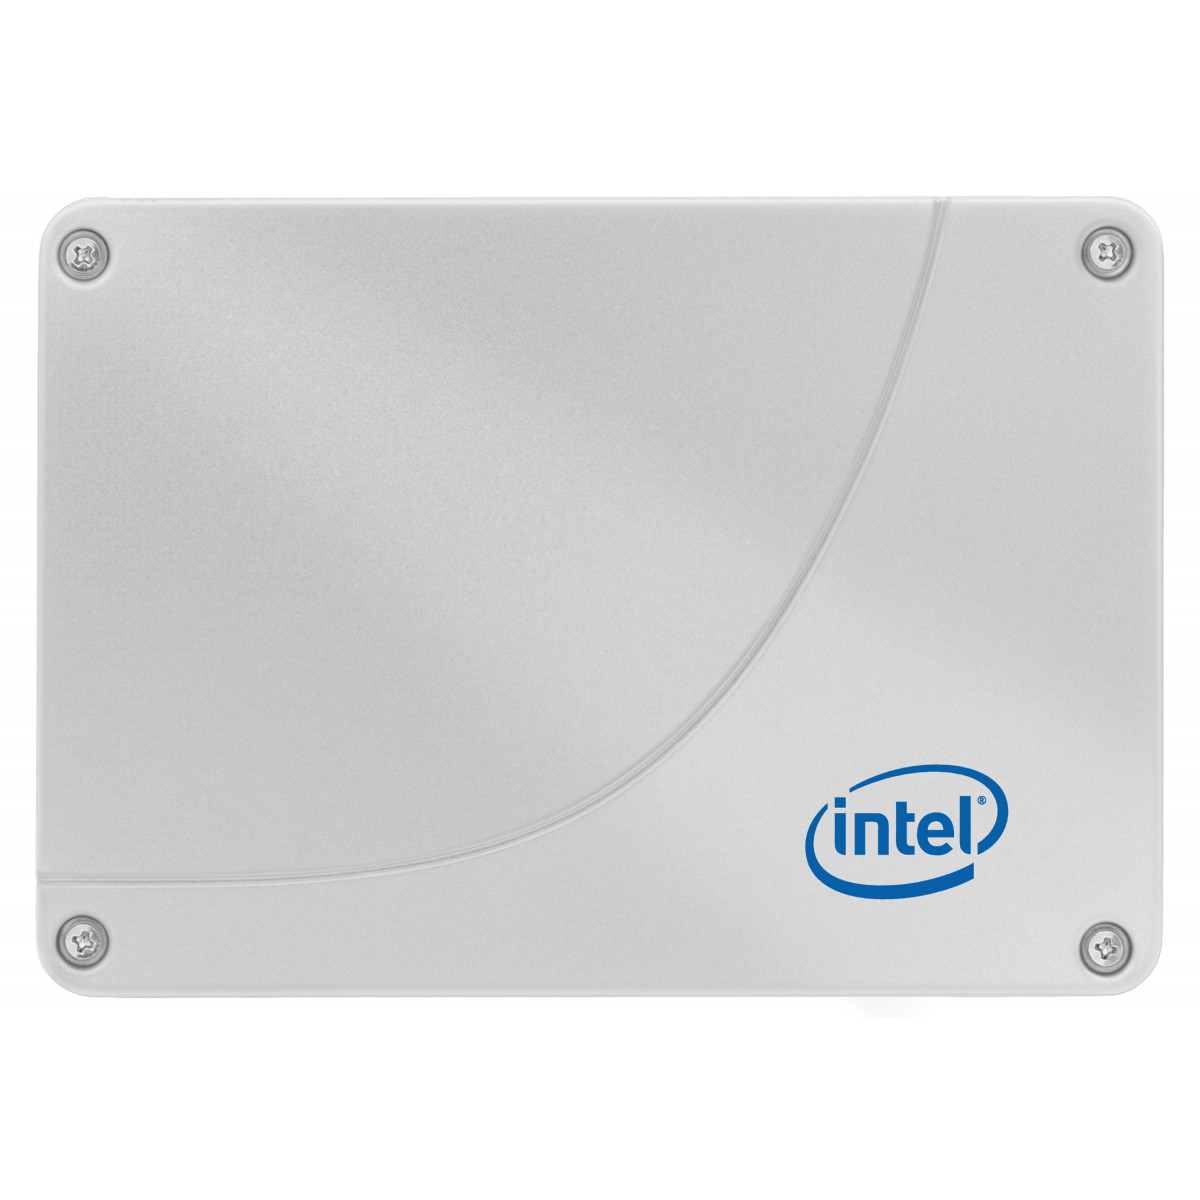 Intel SSD D3-S4620 Series960GB 2.5in SATA S Pk - Solid State Disk - Serial ATA